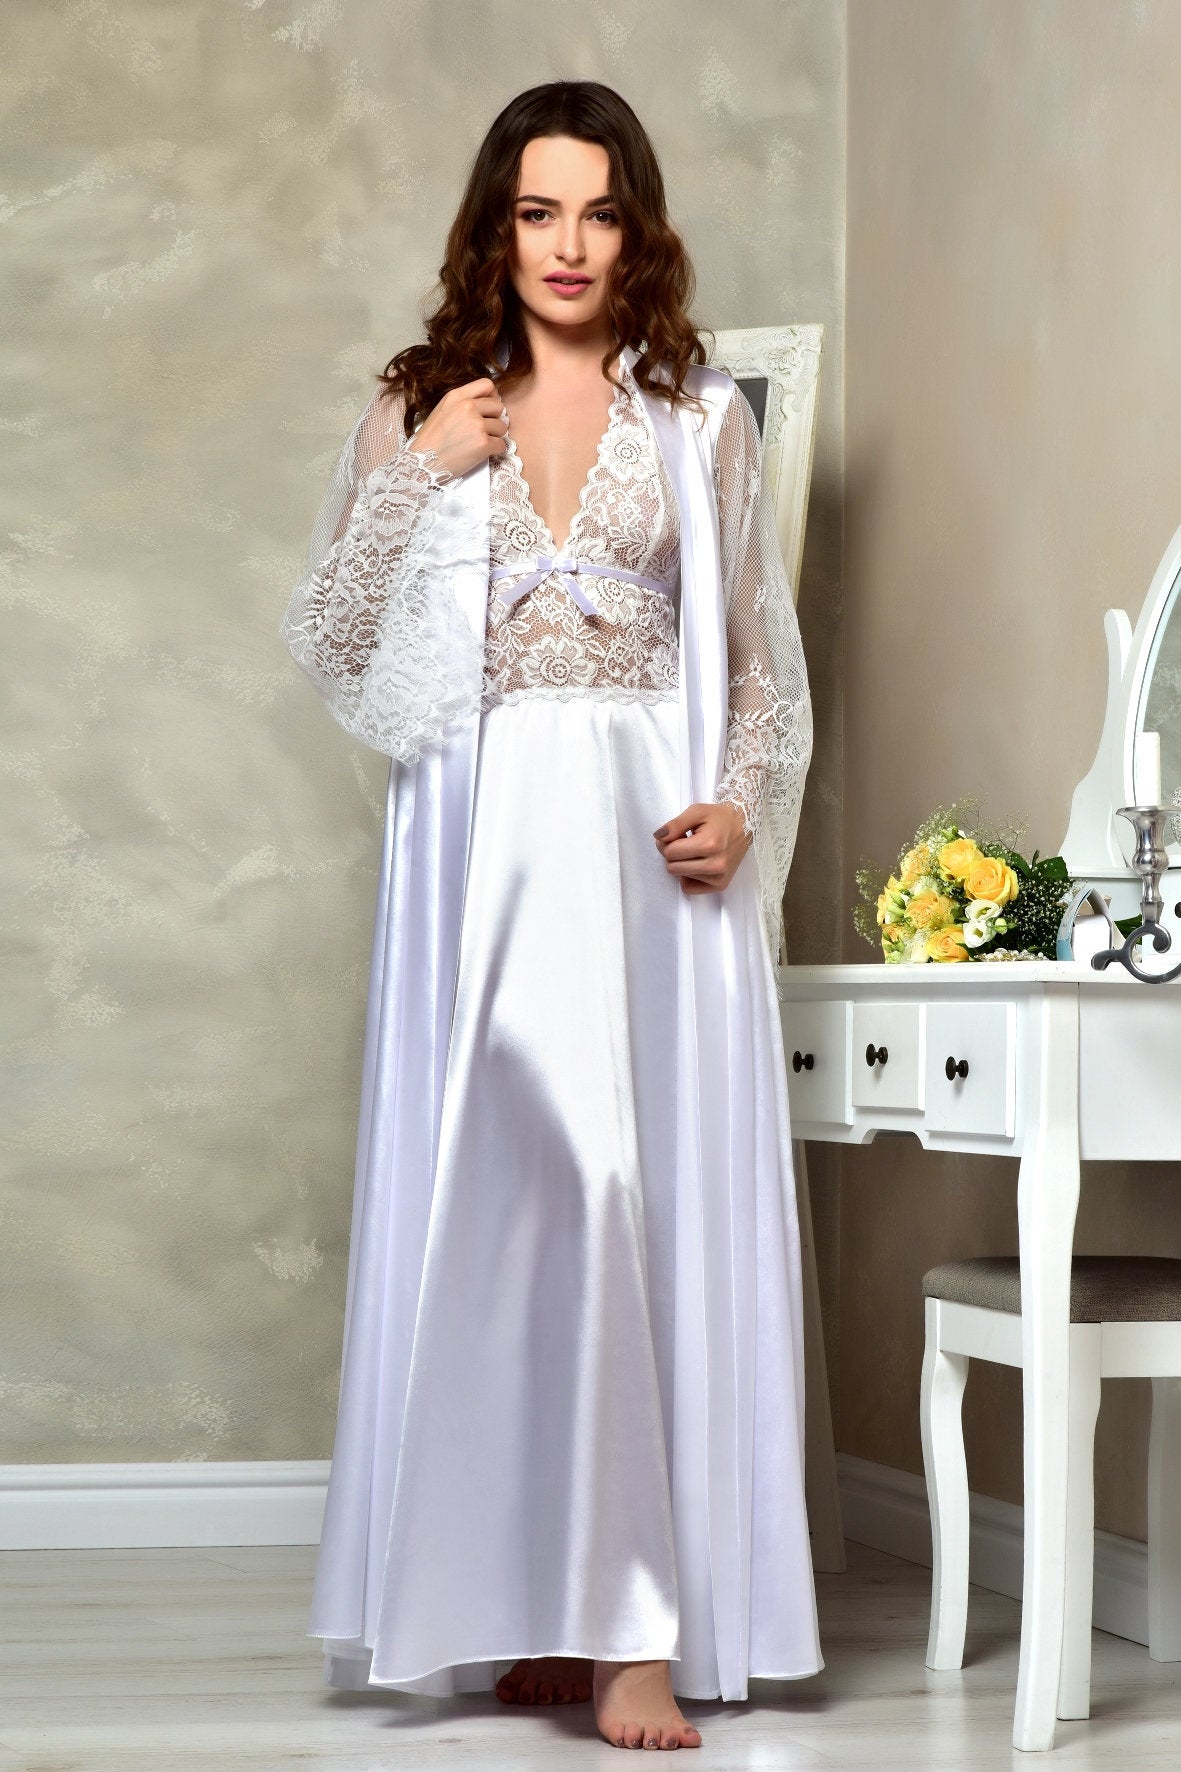 White Bridal Peignoir | Lace Nightgown and Robe Set – Marrysol